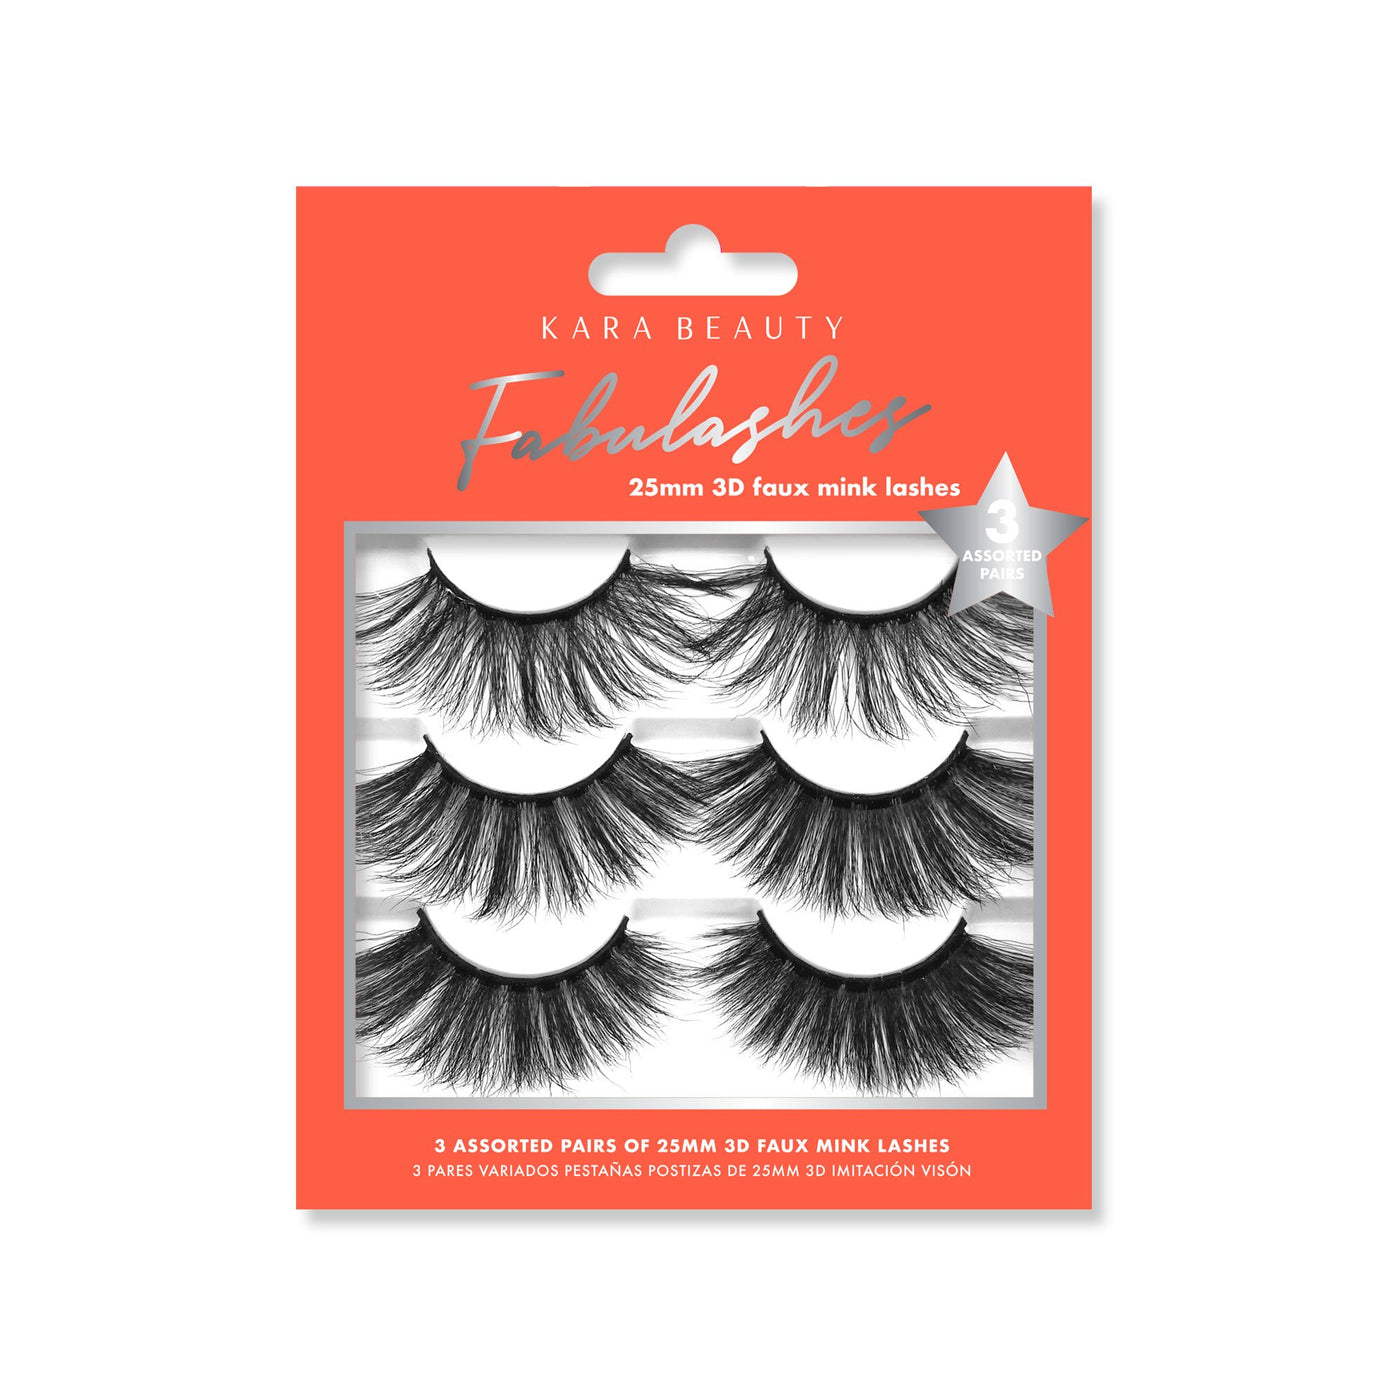 Kara Beauty 25mm 3D Faux Mink lashes 3 Assorted pairs pack